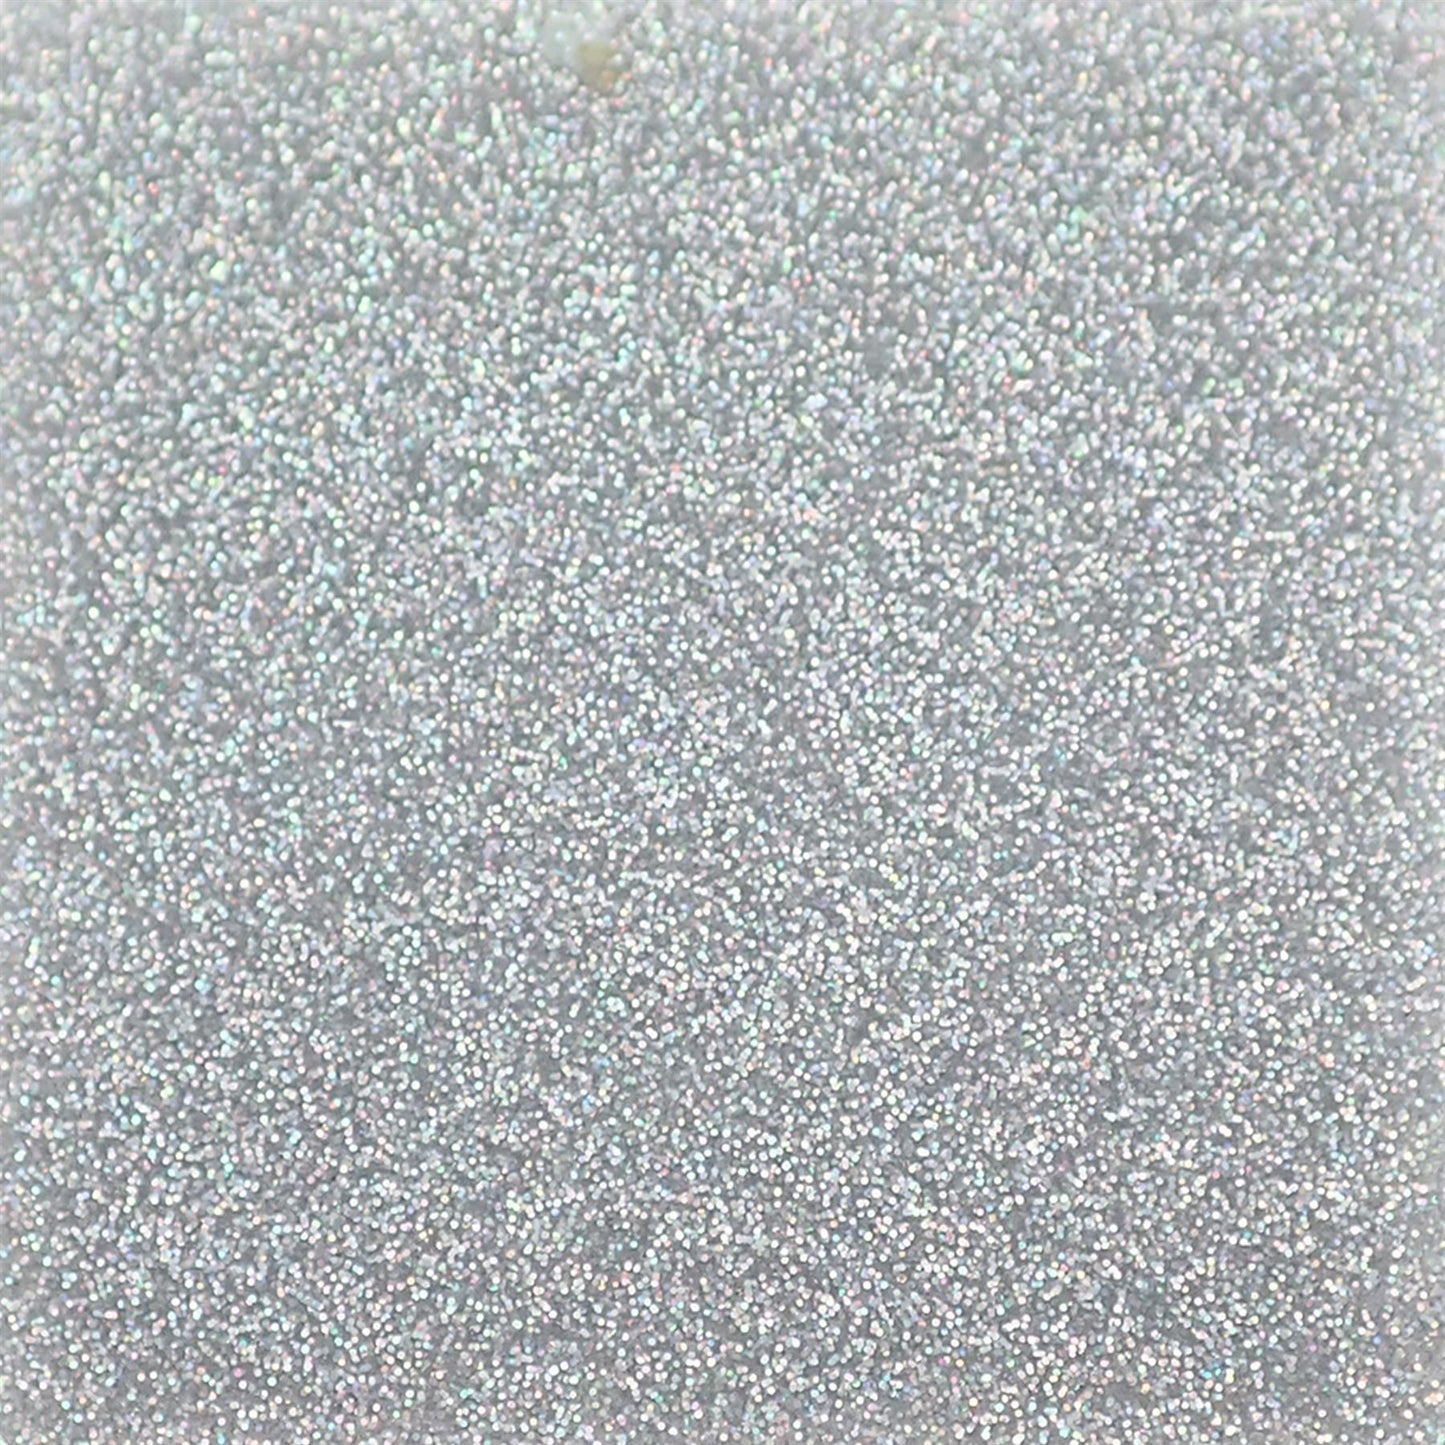 Incudo Silver 2-Sided Holographic Glitter Acrylic Sheet - 300x200x3mm (11.8x7.87x0.12")